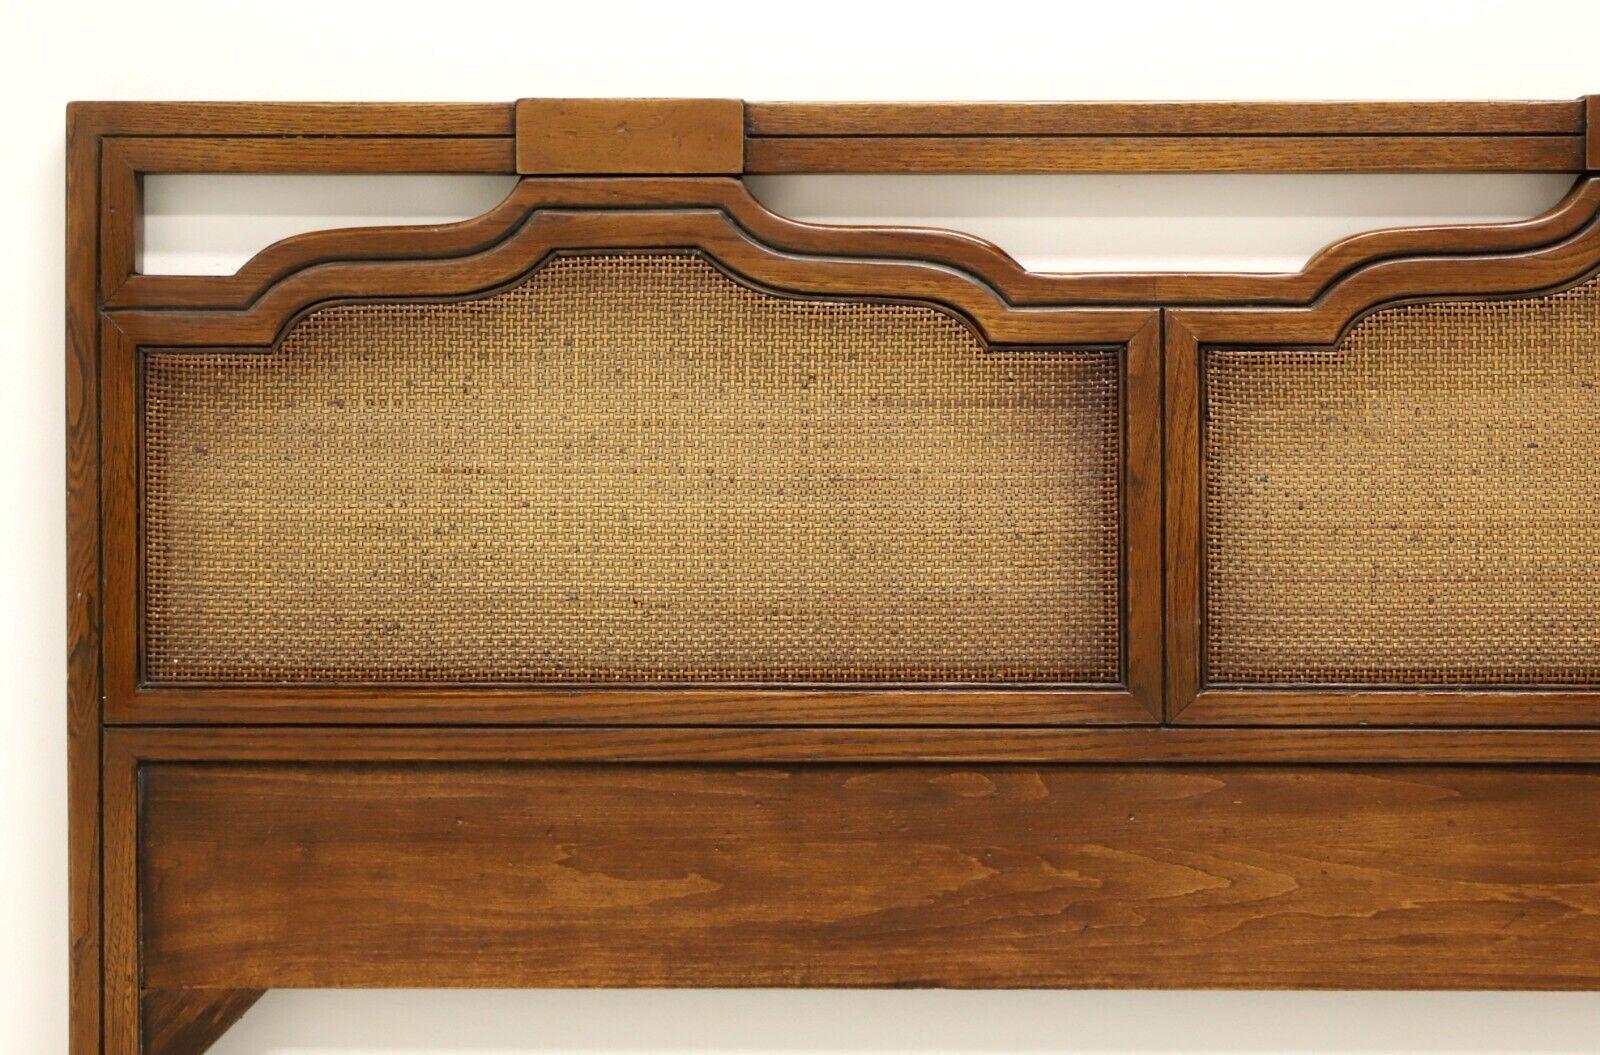 A Neoclassical style king size headboard by Fancher Furniture. Walnut & oak with three decoratively carved panels inset with cane. Made in Salamanca, New York, USA, in the mid 20th century. 

Measures: 79W 1D 39.5H

Exceptionally good vintage